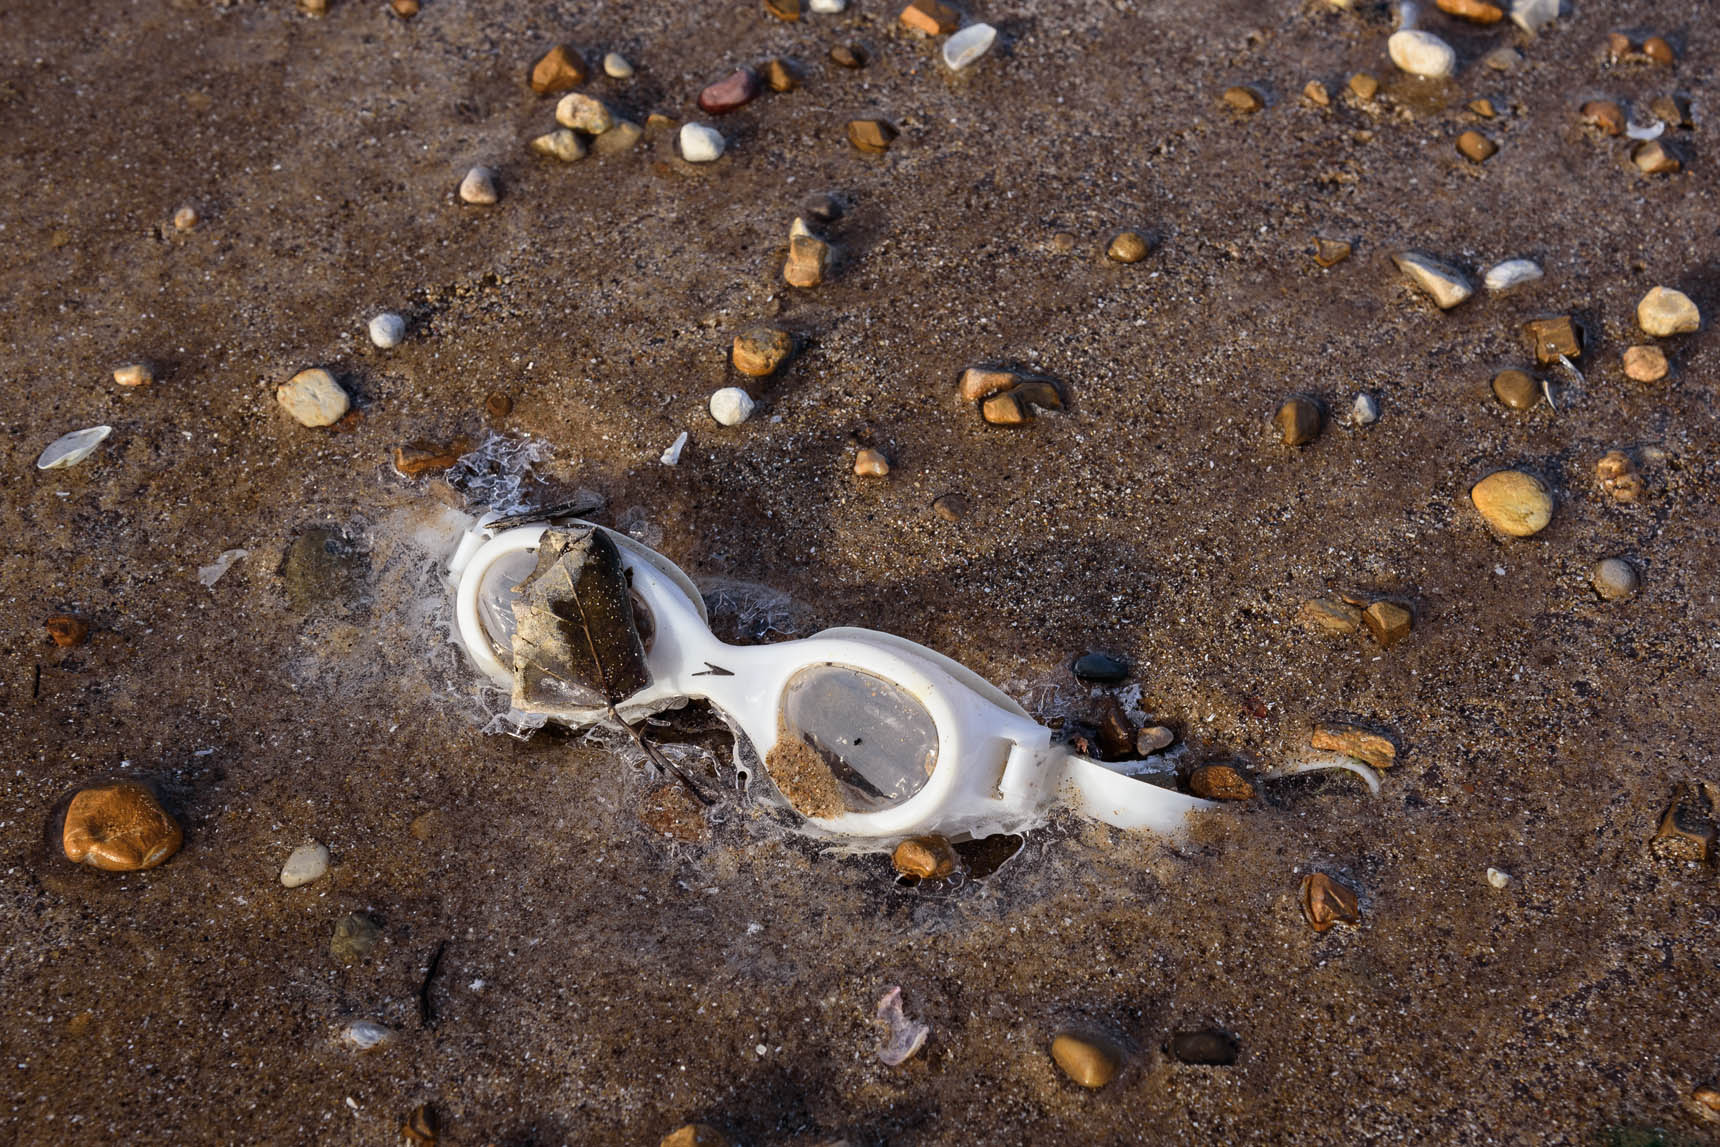  - Great Lakes Plastic Pollution - Photographs by Michael Courier